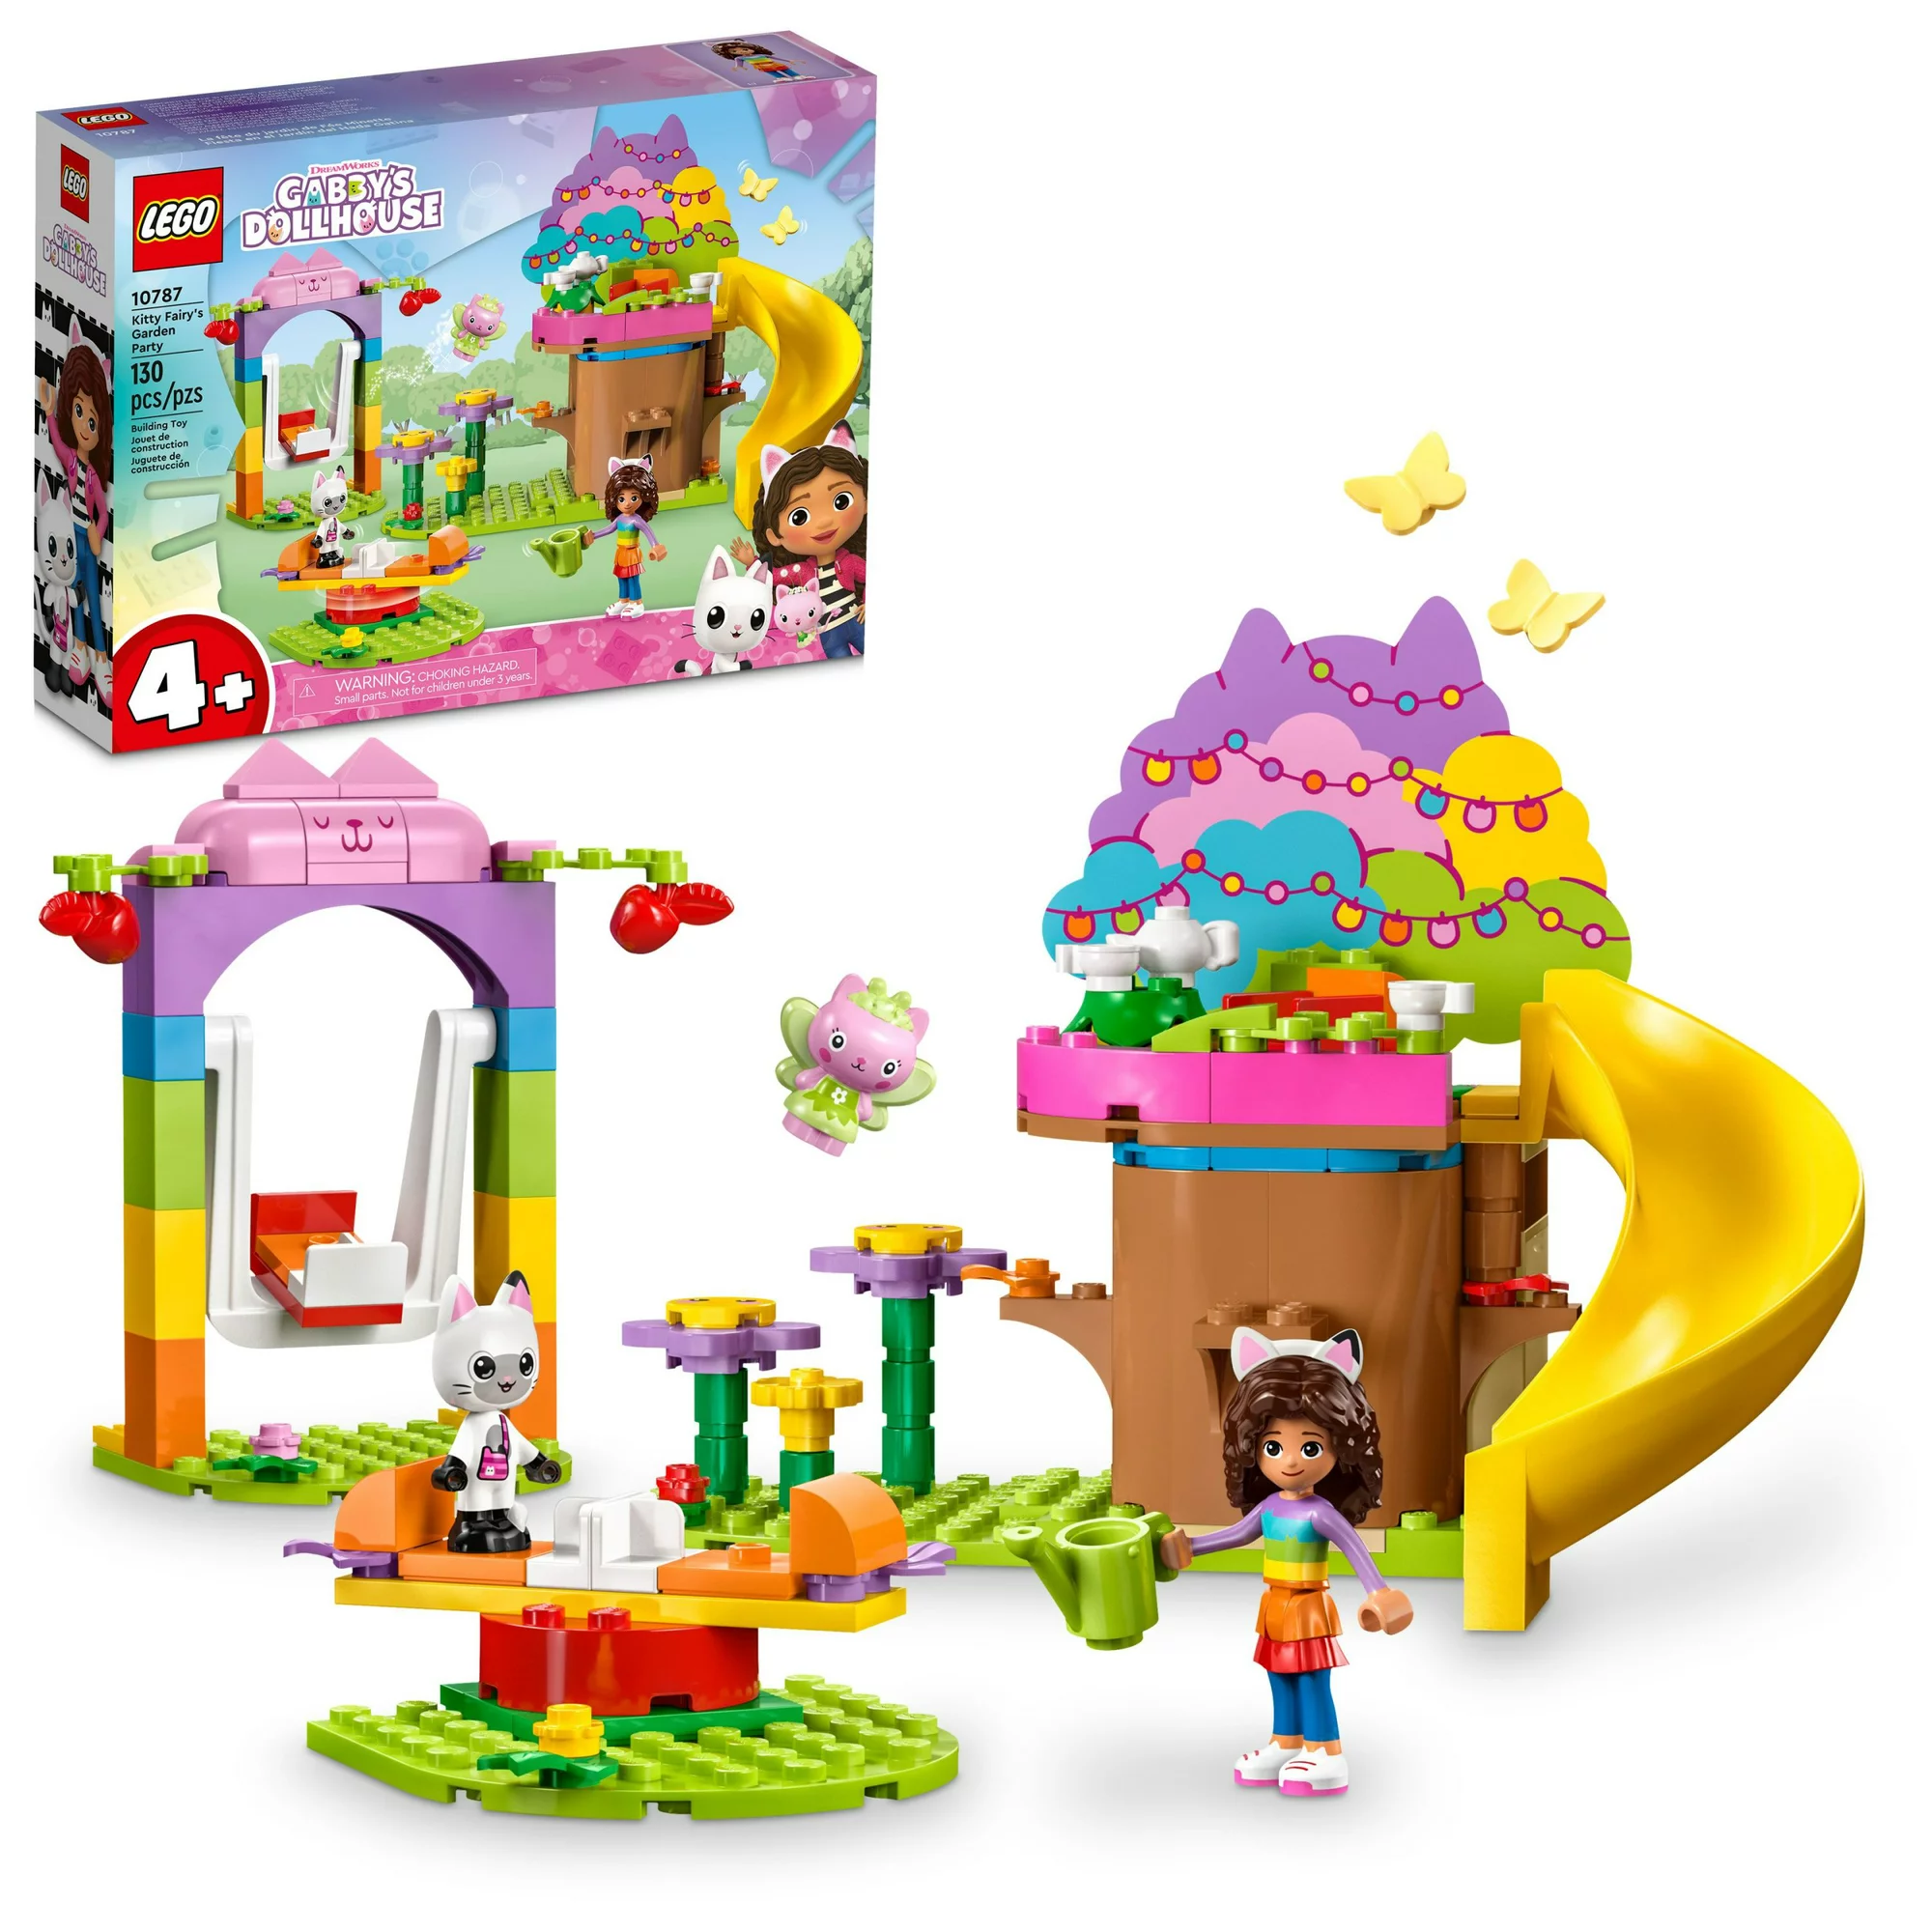 lego gabby's dollhouse kitty fairy’s garden party 10787 building toy with tree house, swing, slide, and merry go round, includes gabby and pandy paws, best christmas gift for kids ages 4+ (4)